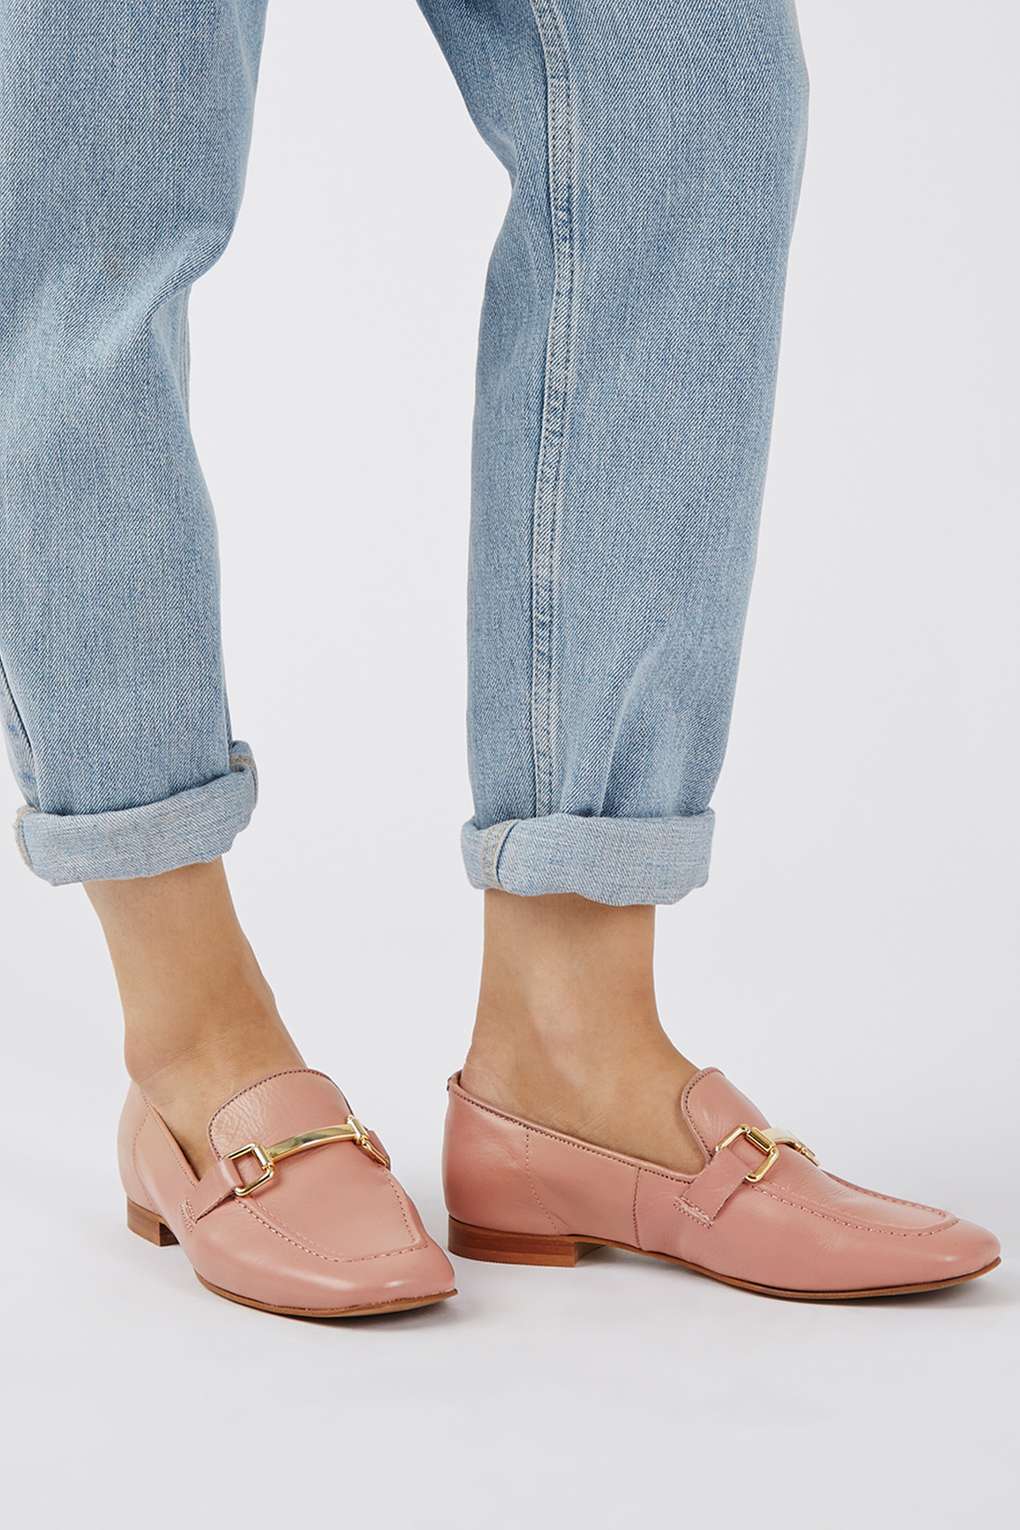 Loafers Trend Wishlist For Autumn 2016 – JacquardFlower